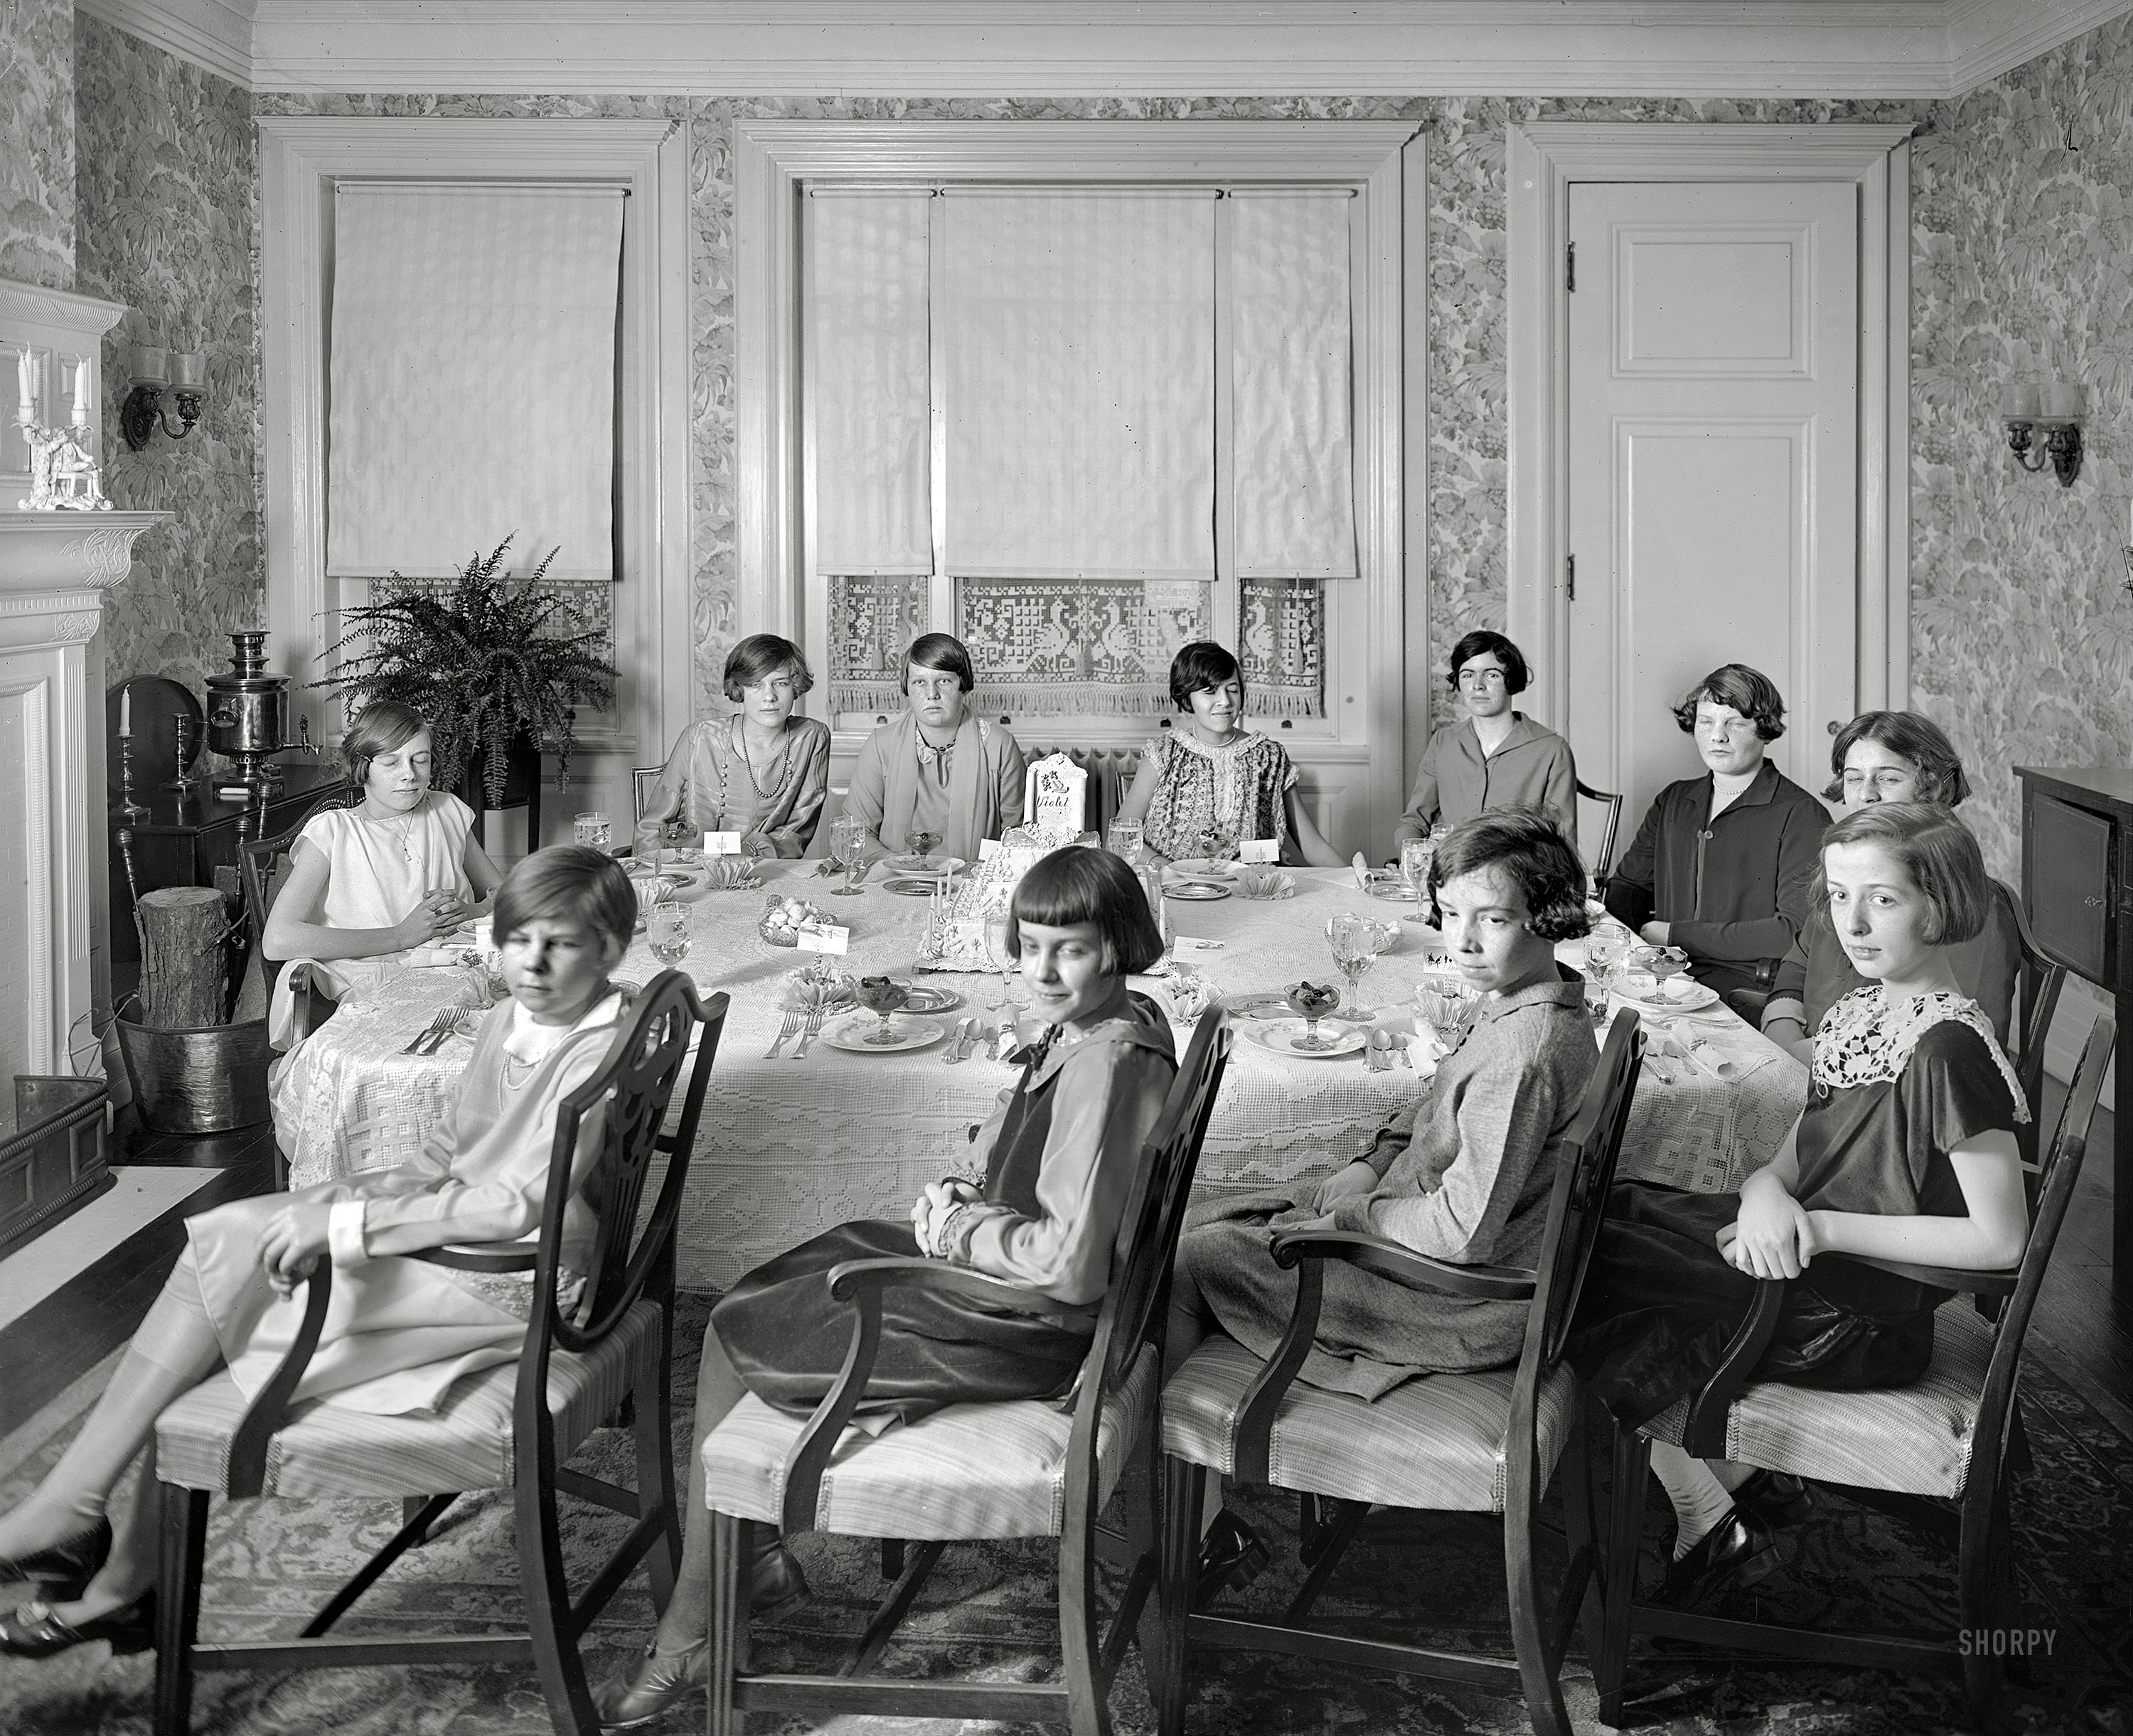 Washington, D.C., circa 1926. "Mrs. Gardner Orme group," a.k.a. the Little Foxes. National Photo Company Collection glass negative. View full size.